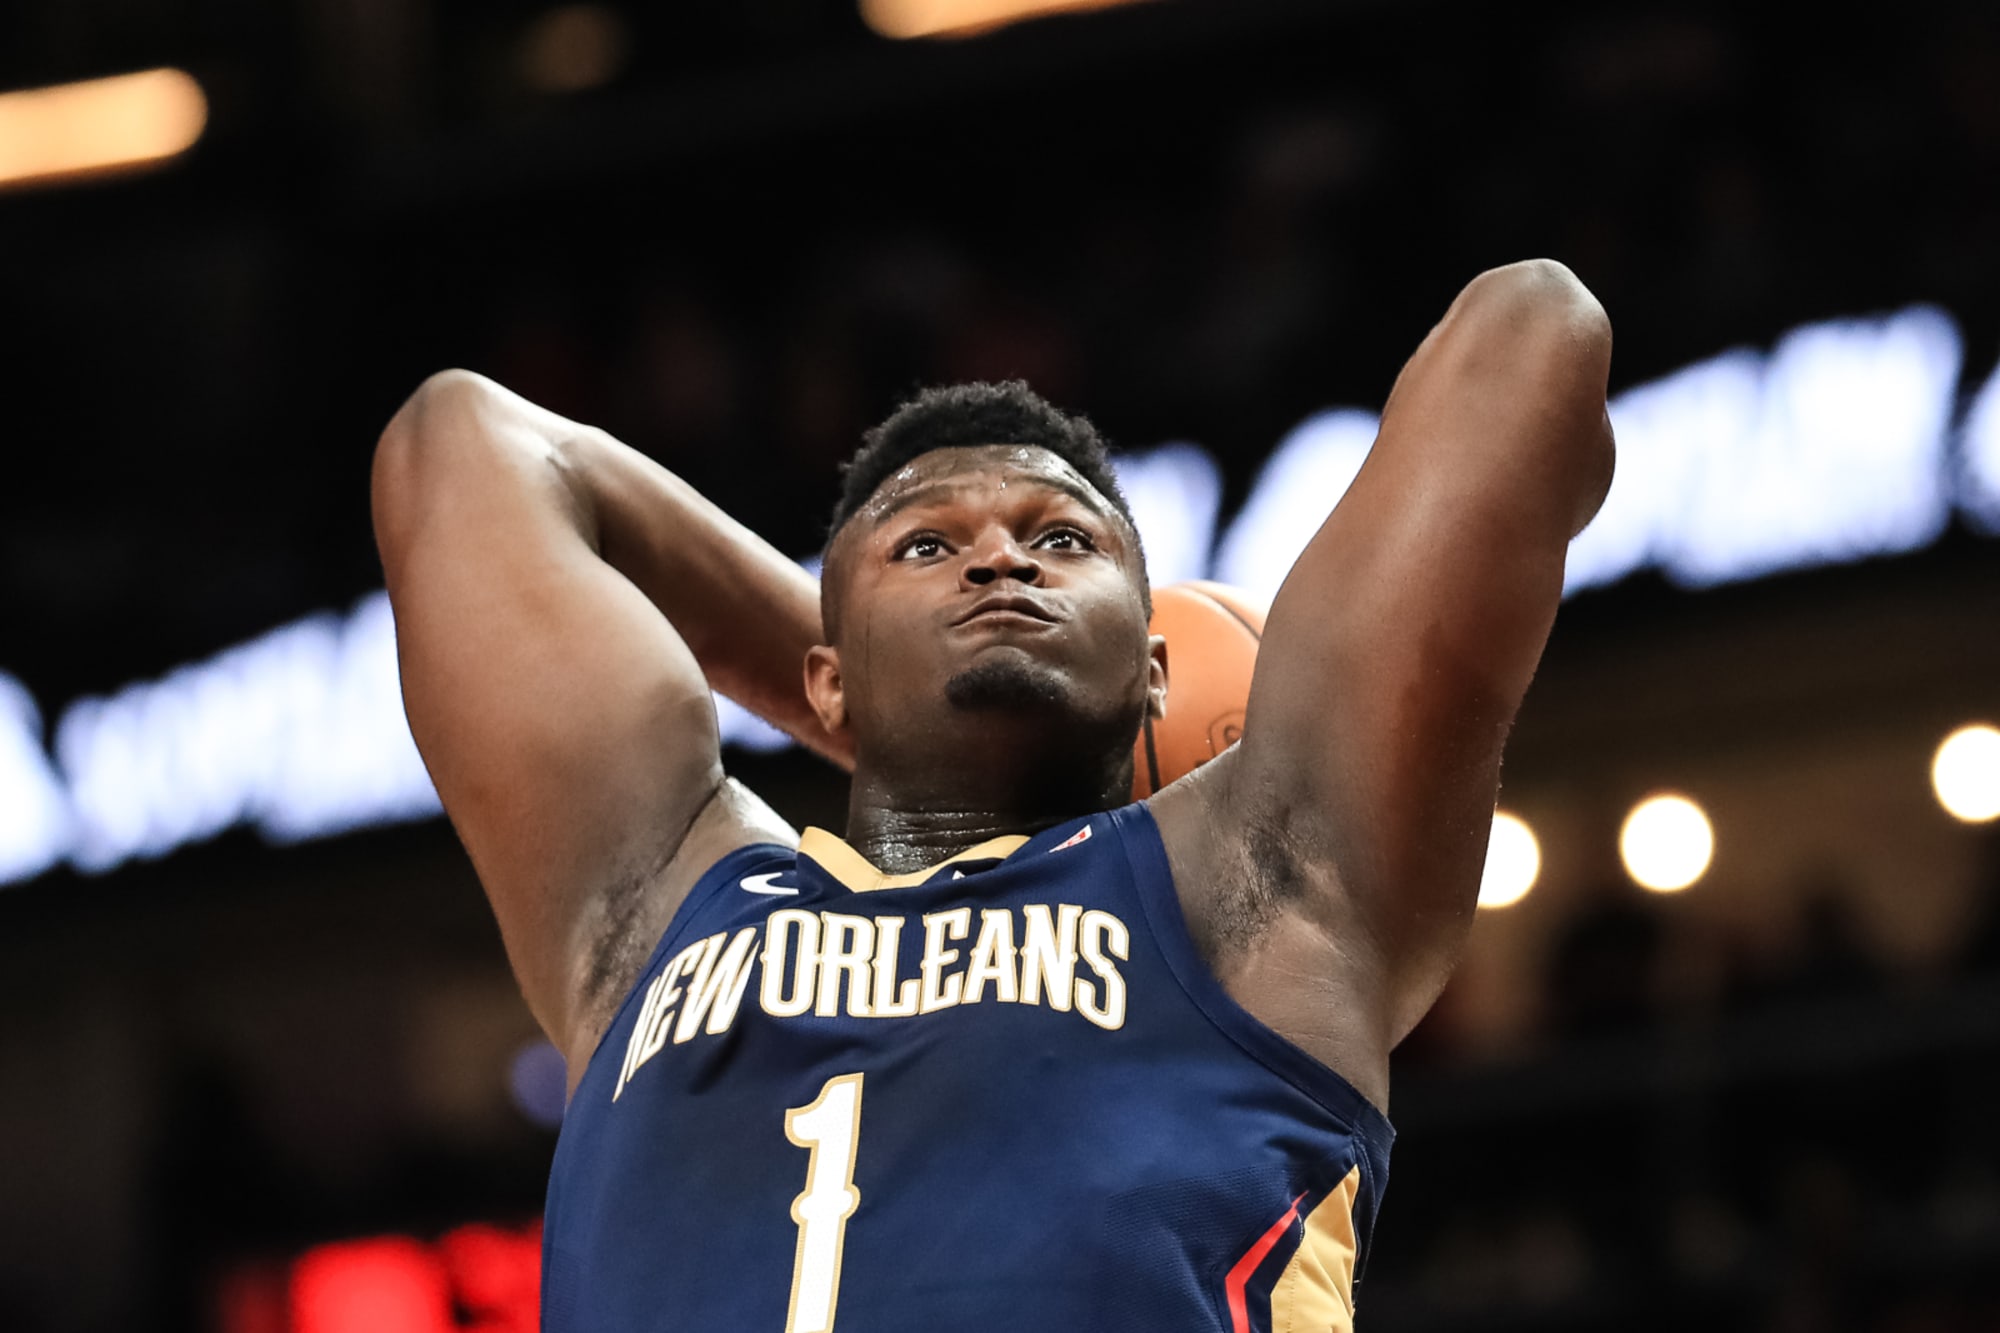 Zion Williamson excited about potential of Pelicans' big 3 with